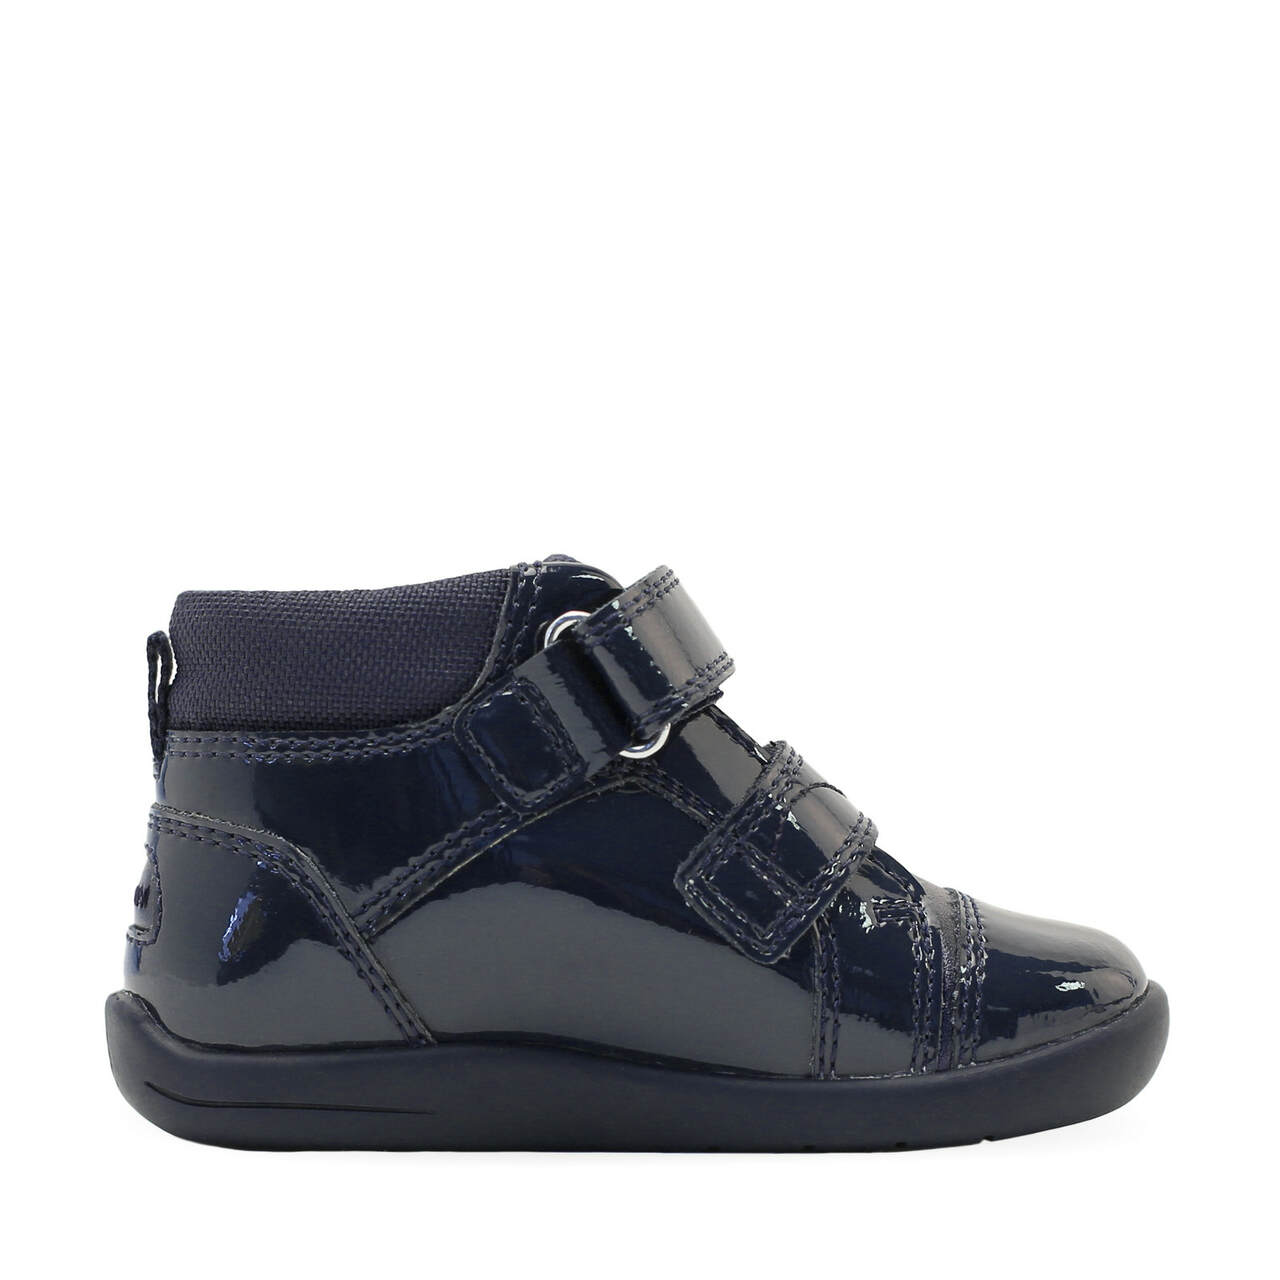 StartRite Daydream 0792_9 Girls Navy Iridescent Leather Touch Fastening Ankle Boots